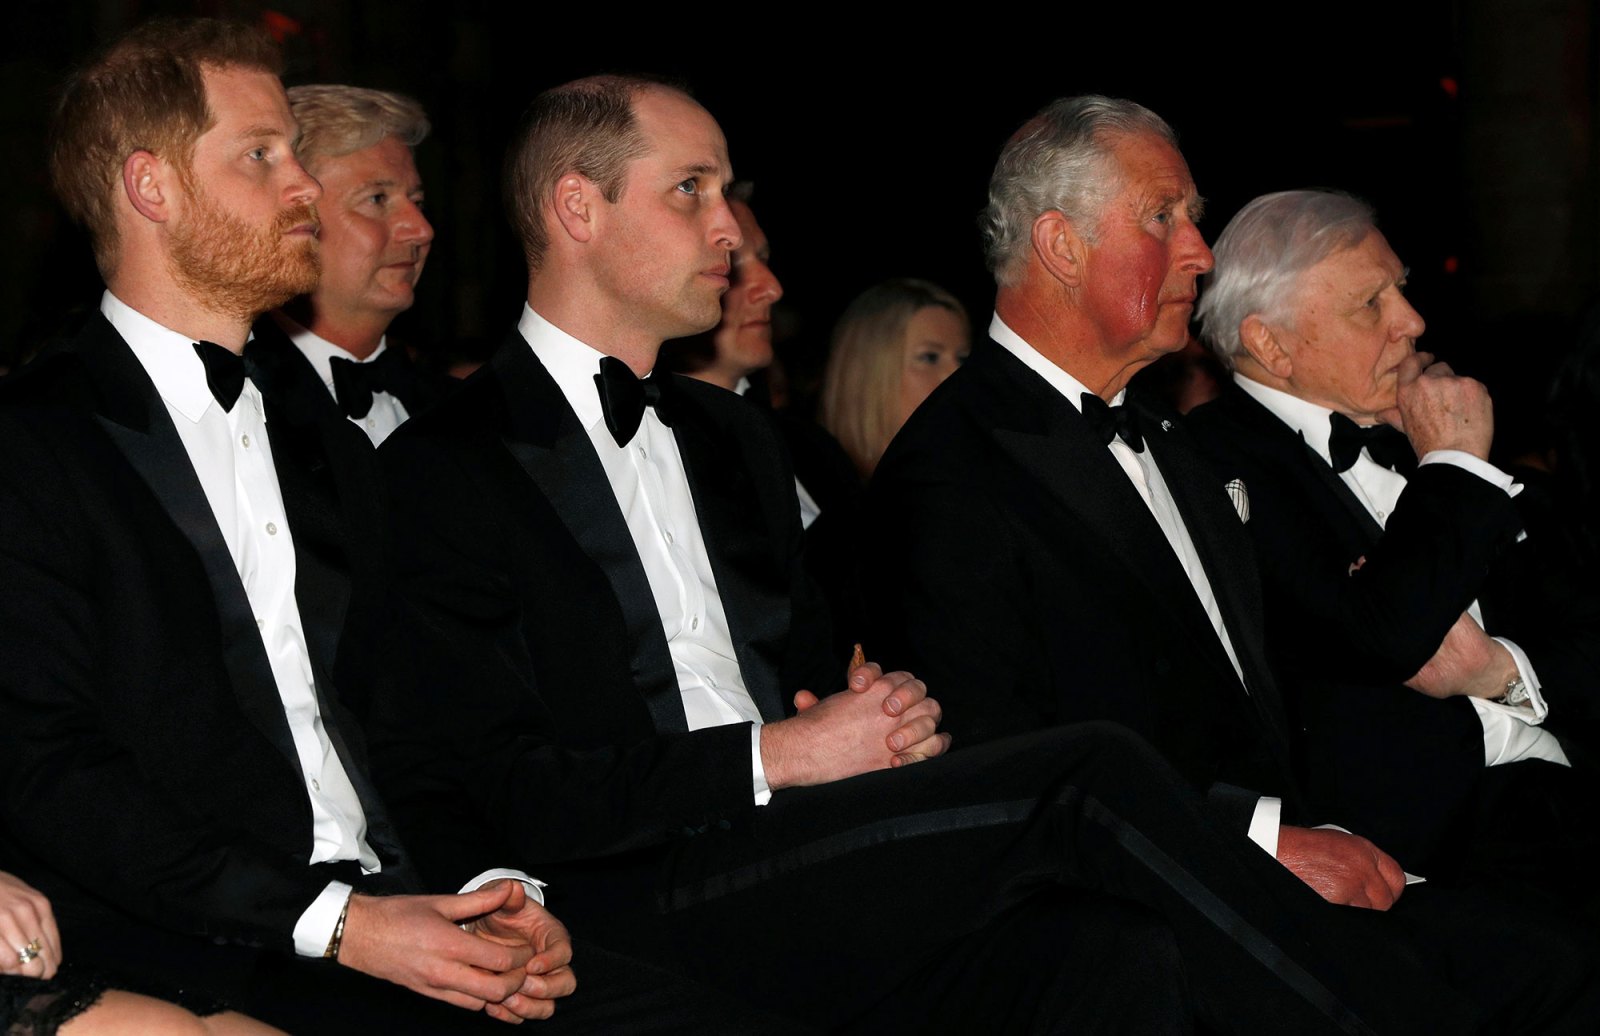 Royal Trio! Prince Charles, Prince William and Prince Harry Step Out Together for Rare Photo